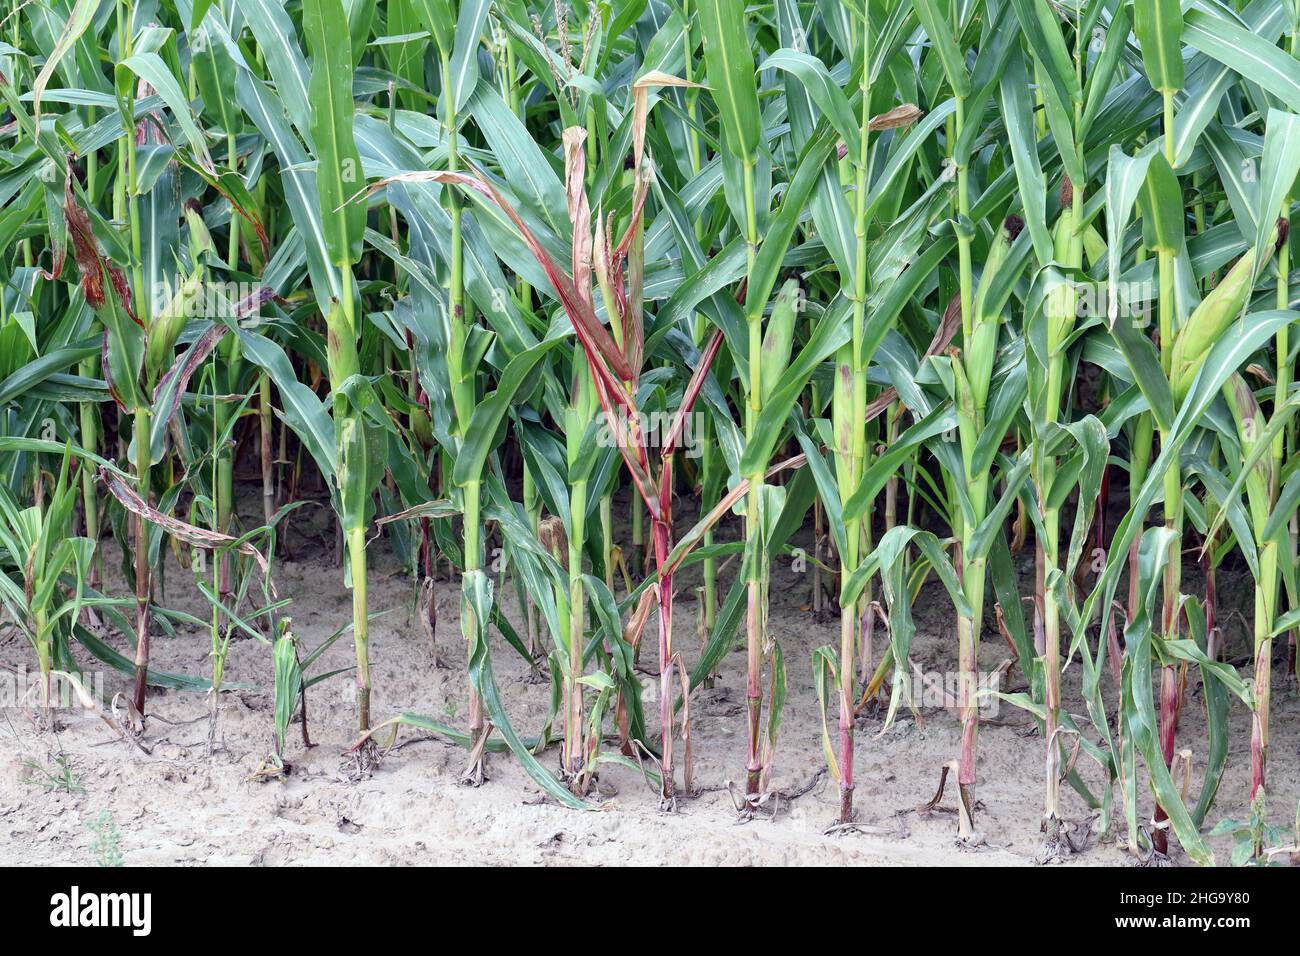 Red discoloration of corn leaves due to nutrient deficiencies or disease caused by viruses or bacteria. Stock Photo